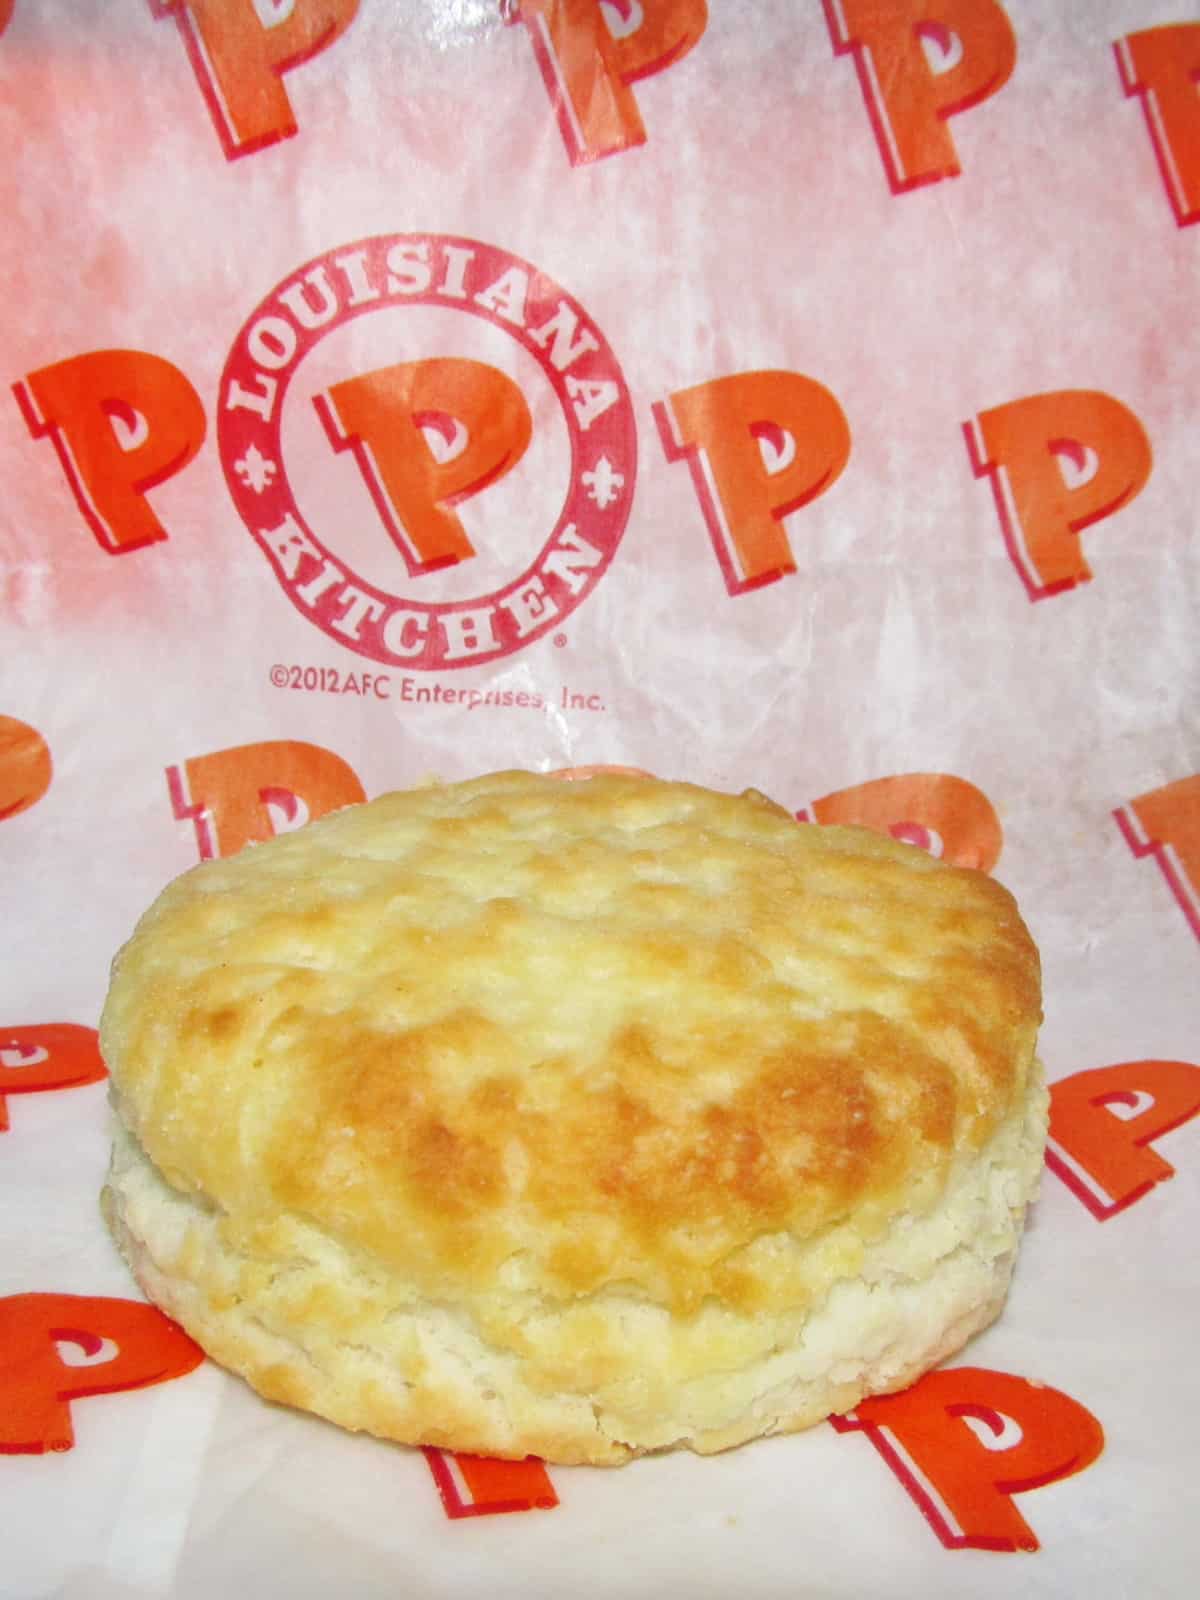 Biscuit from Popeyes